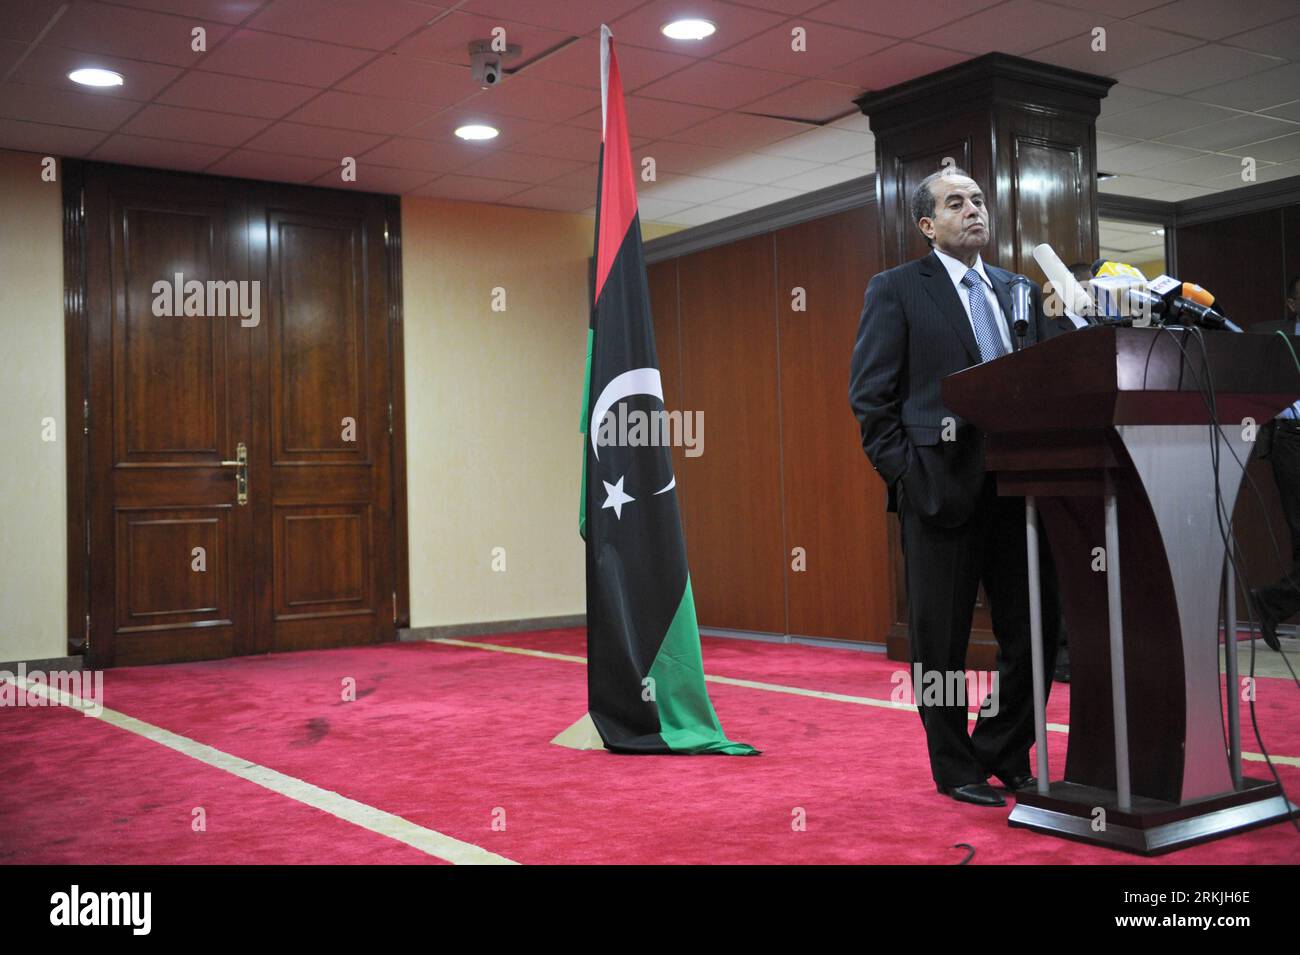 Bildnummer: 56136869  Datum: 29.09.2011  Copyright: imago/Xinhua (110929) -- TRIPOLI, Sept. 29, 2011 (Xinhua) -- Mahmoud Jibril, chairman of the executive office of Libya s National Transitional Council (NTC), speaks during a press conference in Tripoli, Libya, Sept. 29, 2011. The ruling authorities will postpone the formation of an interim government until the entire Libya is without redoubts of fallen leader, Jibril confirmed here on Thursday. (Xinhua/Li Muzi) LIBYA-TRIPOLI-PRESS CONFERENCE-JIBRIL PUBLICATIONxNOTxINxCHN People Politik premiumd xns x1x 2011 quer     56136869 Date 29 09 2011 C Stock Photo